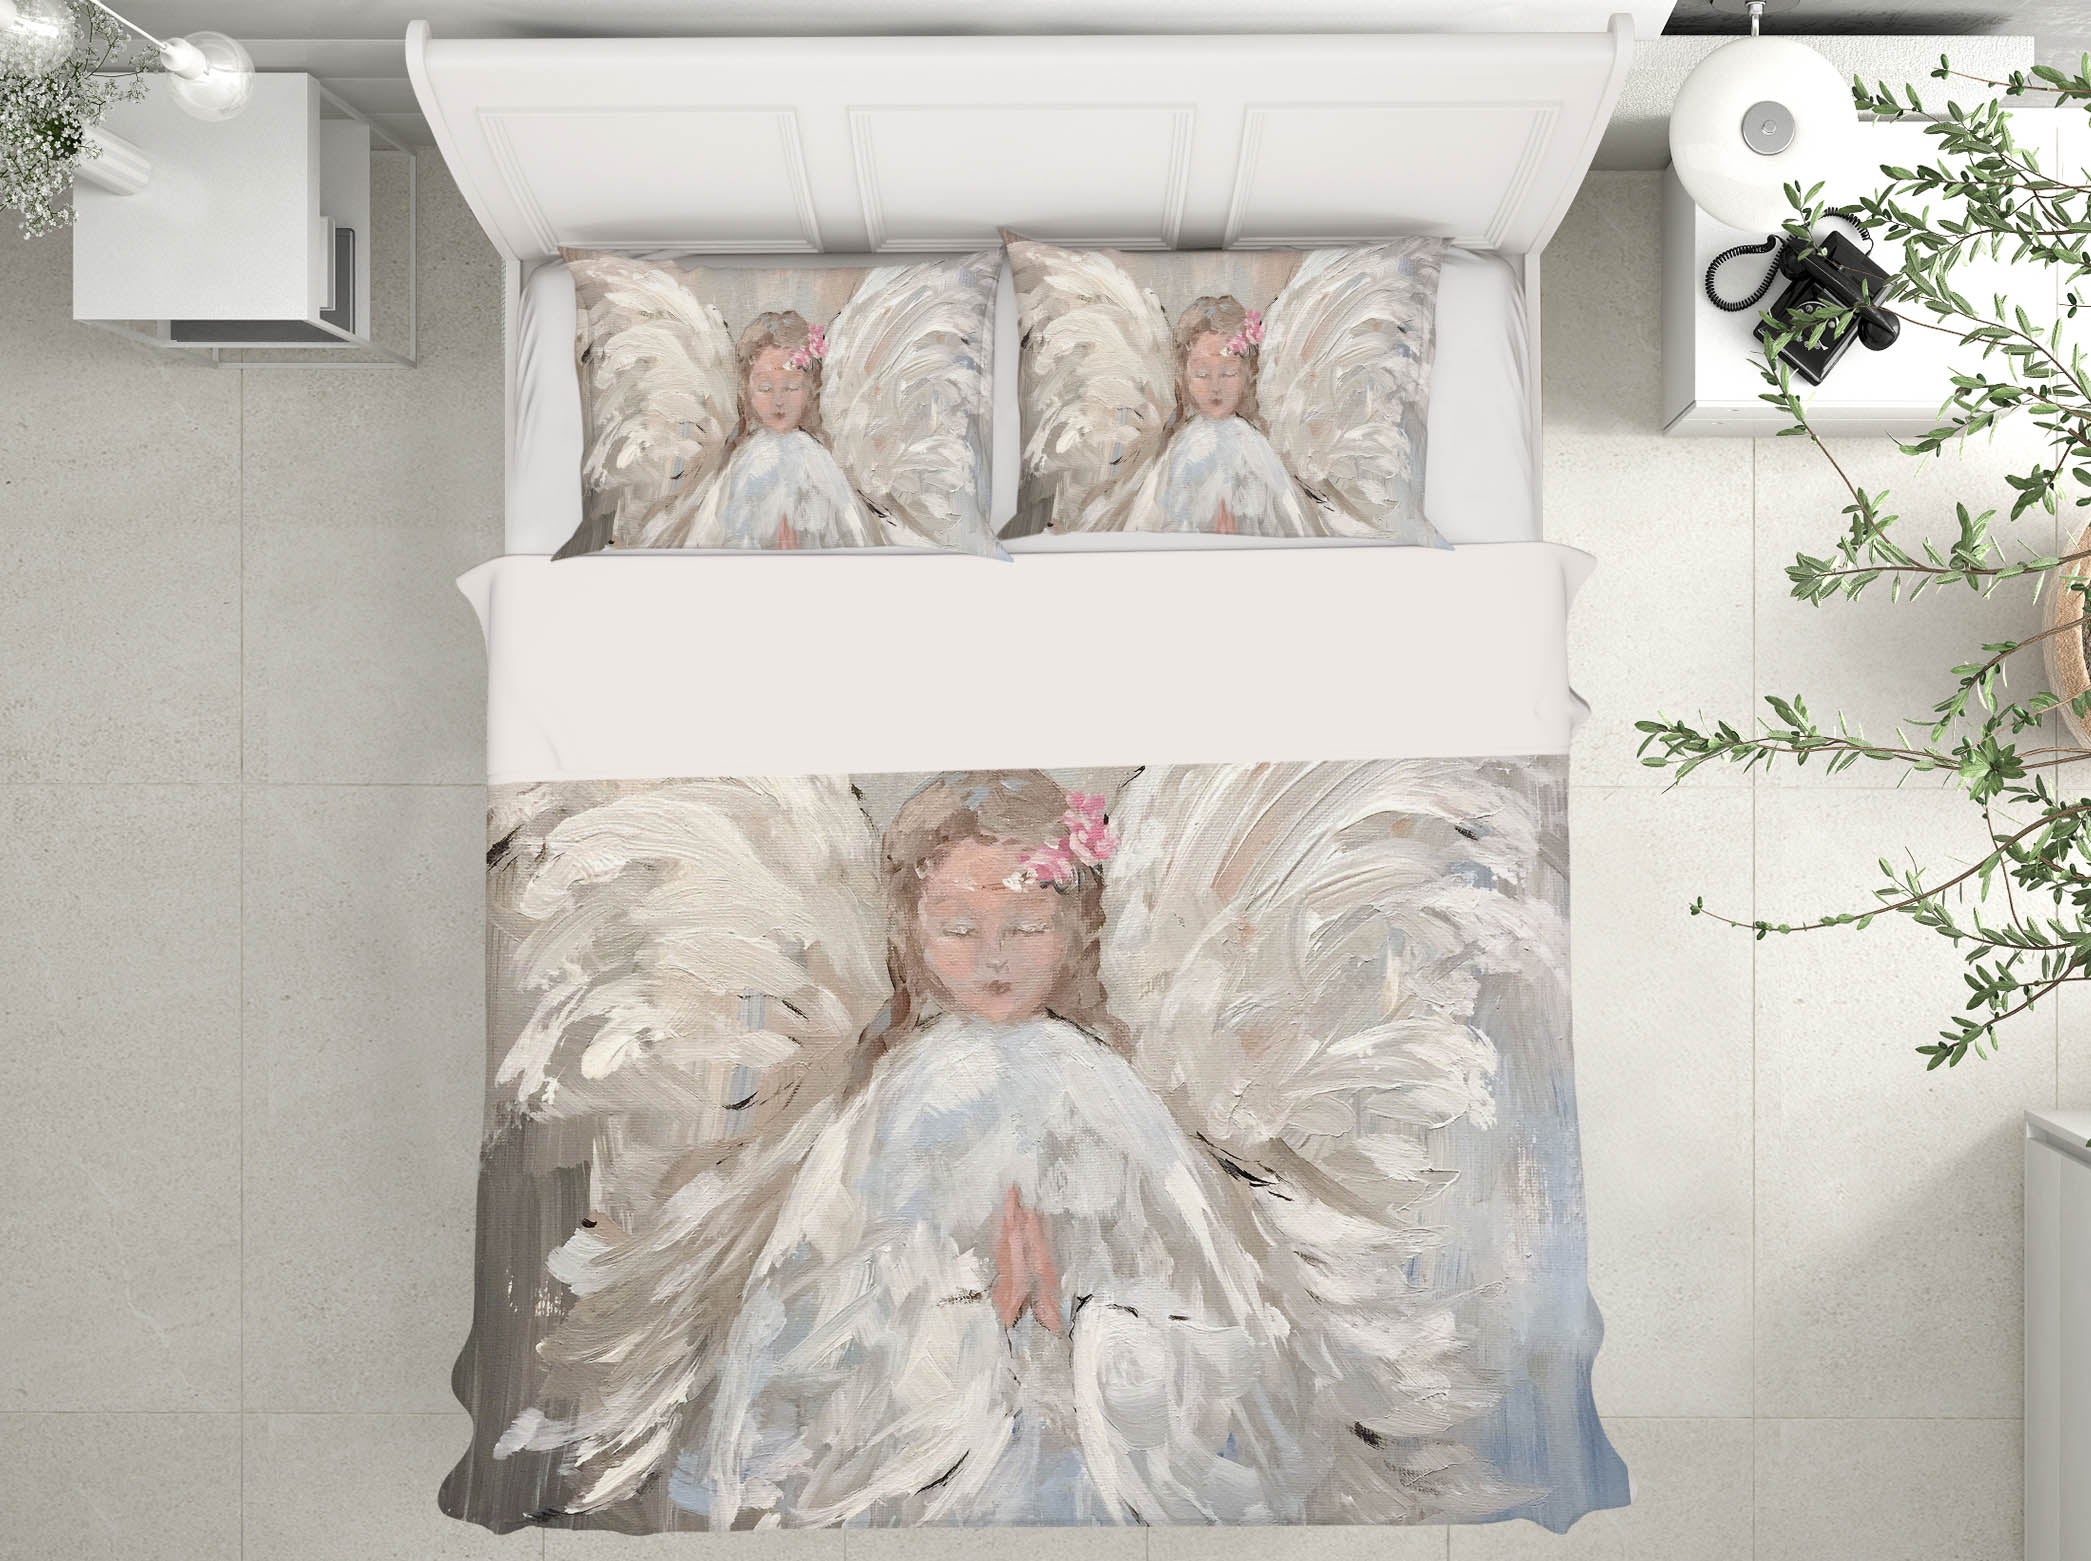 3D Angel Praying 117 Debi Coules Bedding Bed Pillowcases Quilt